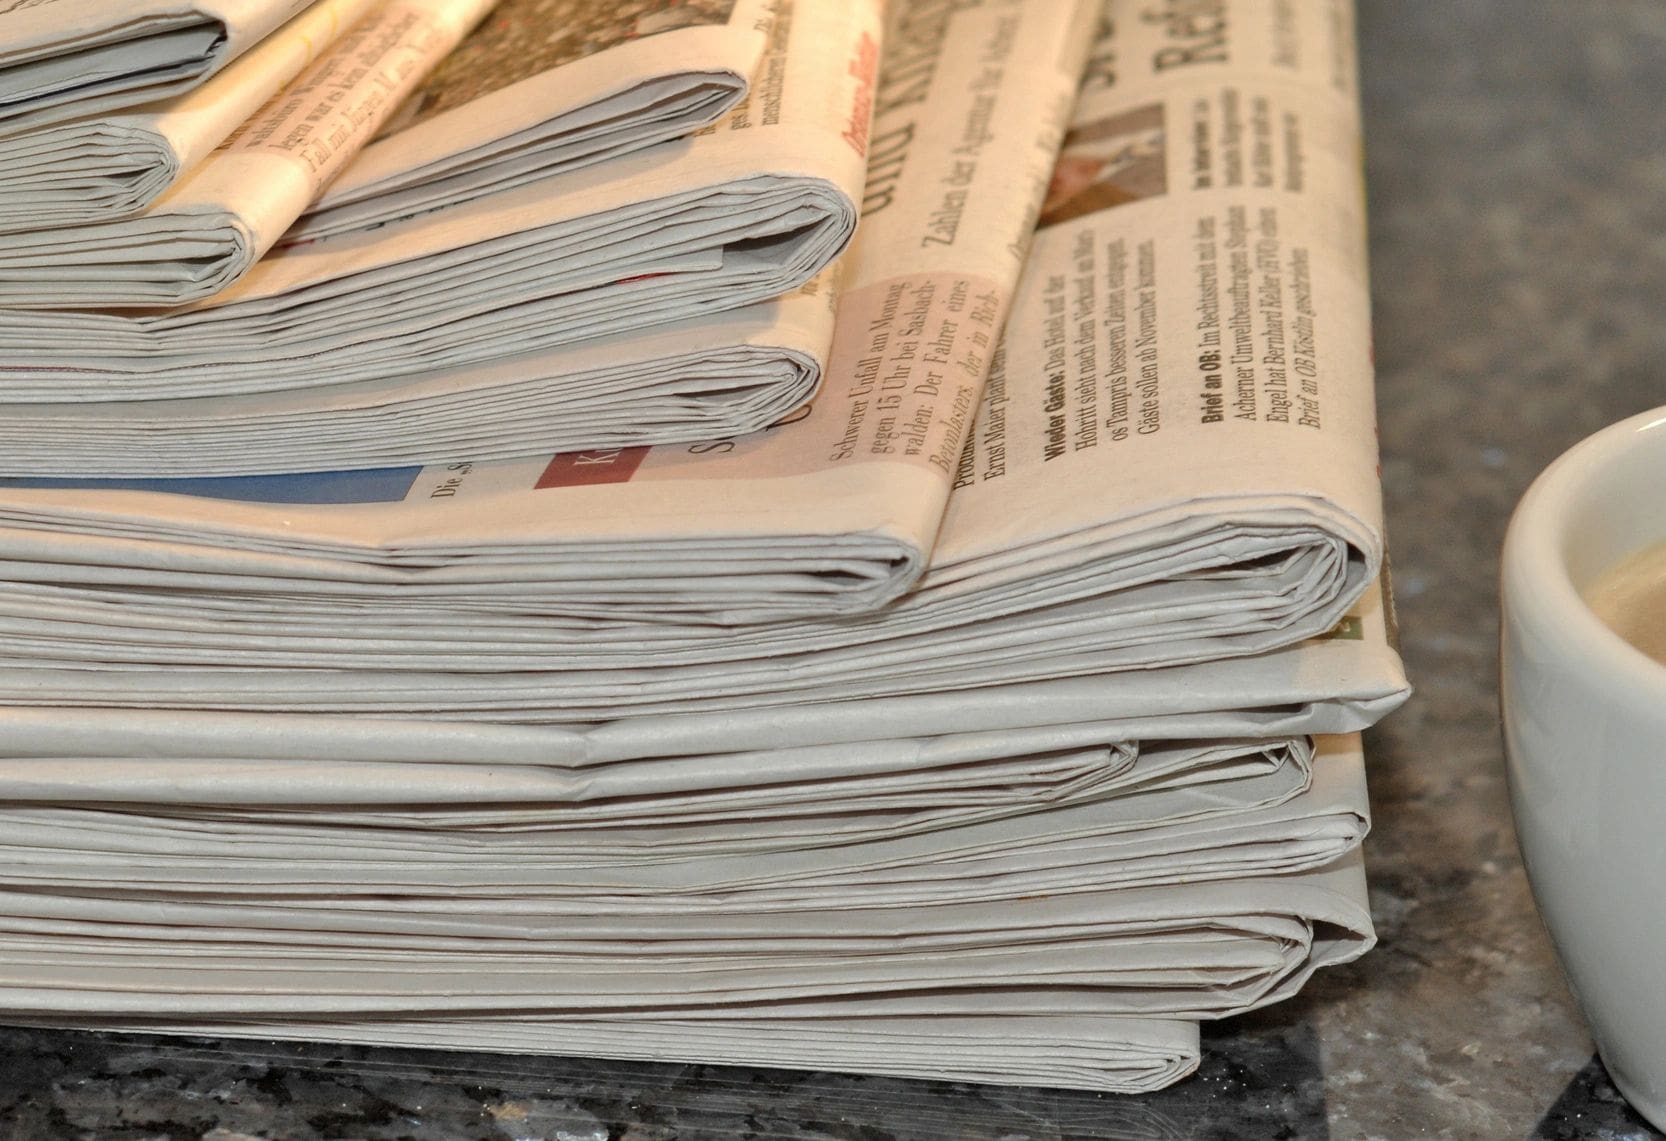 A stack of newspapers on top of each other.